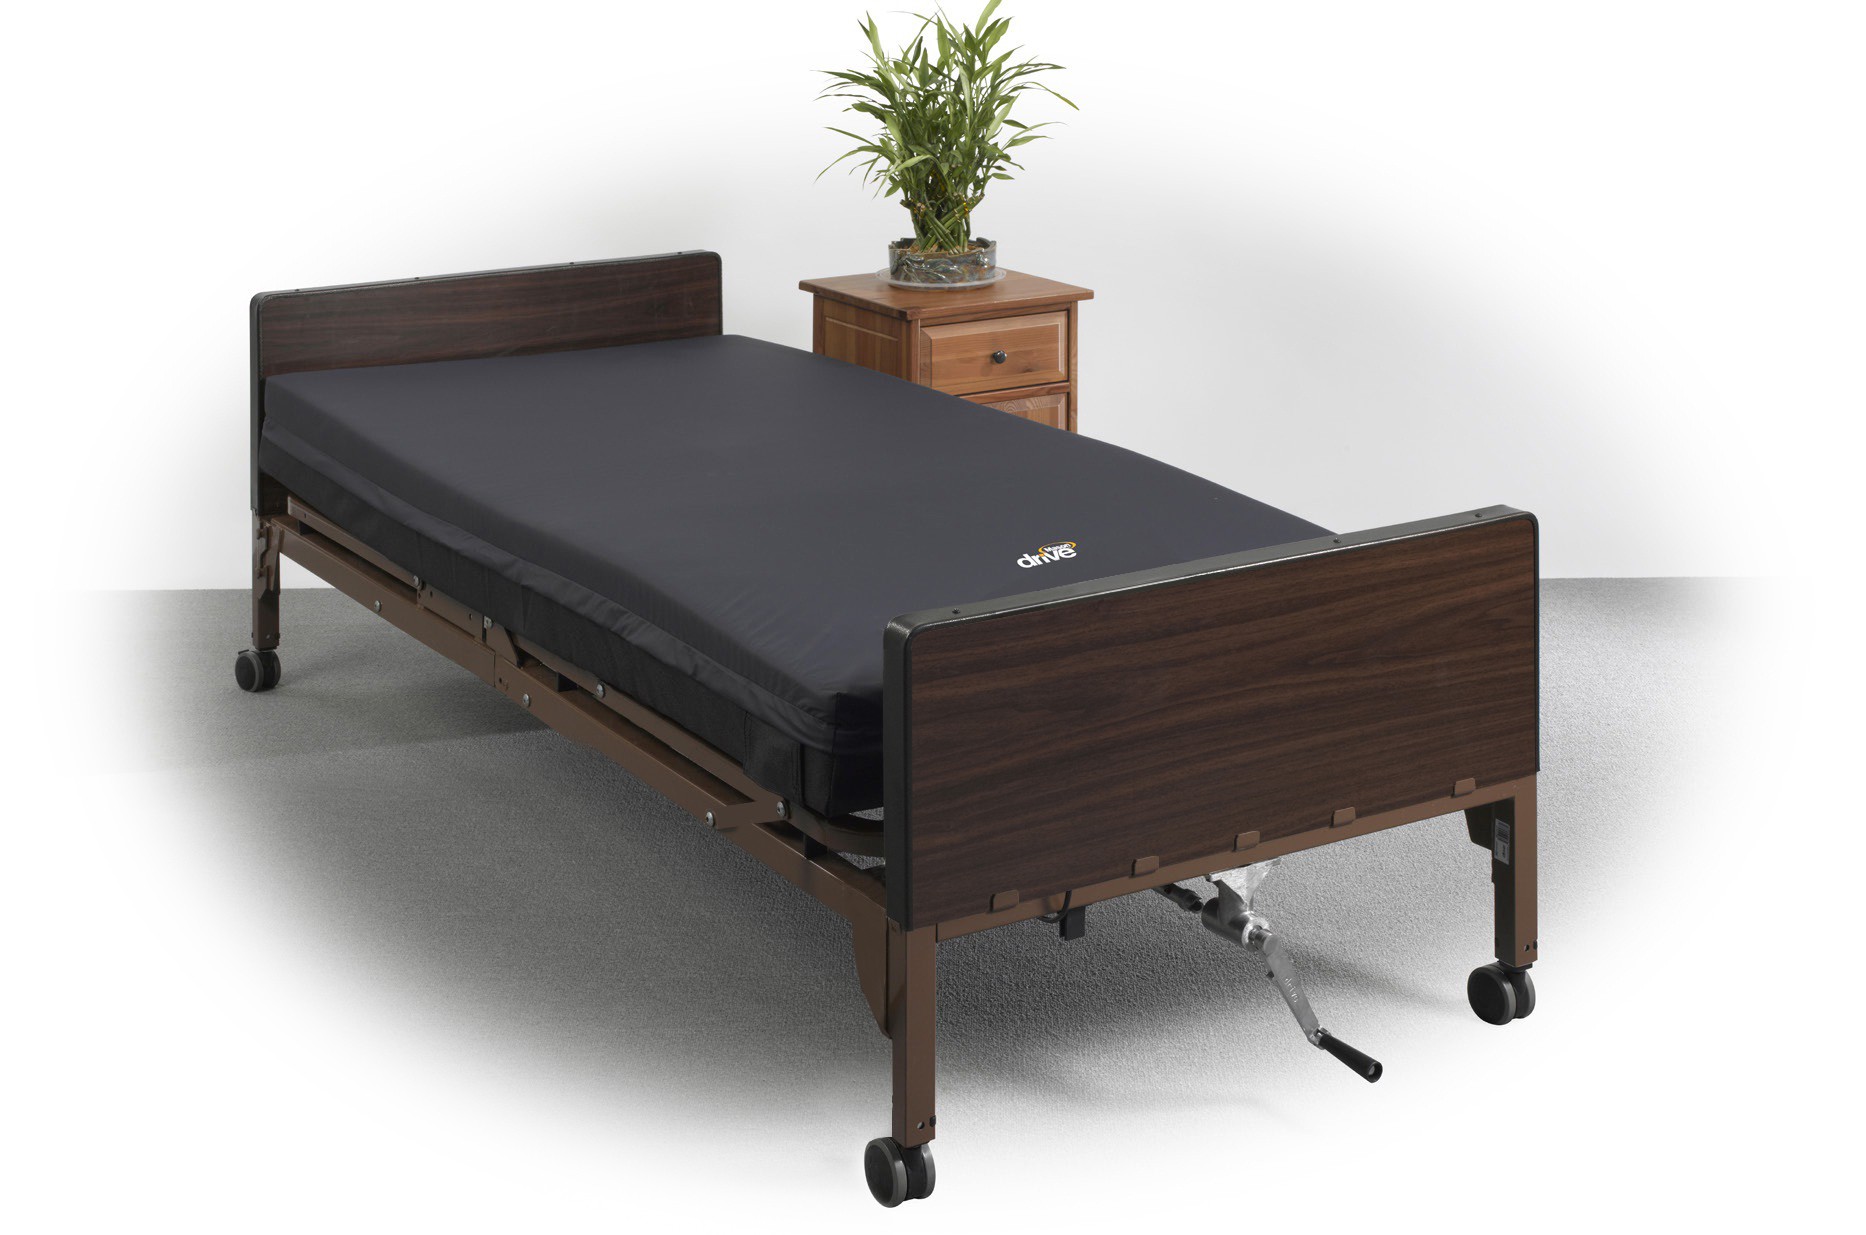 Balanced Aire Non-Powered Self Adjusting Convertible Mattress is in stock and available at On The Mend Medical Supply & Equipment